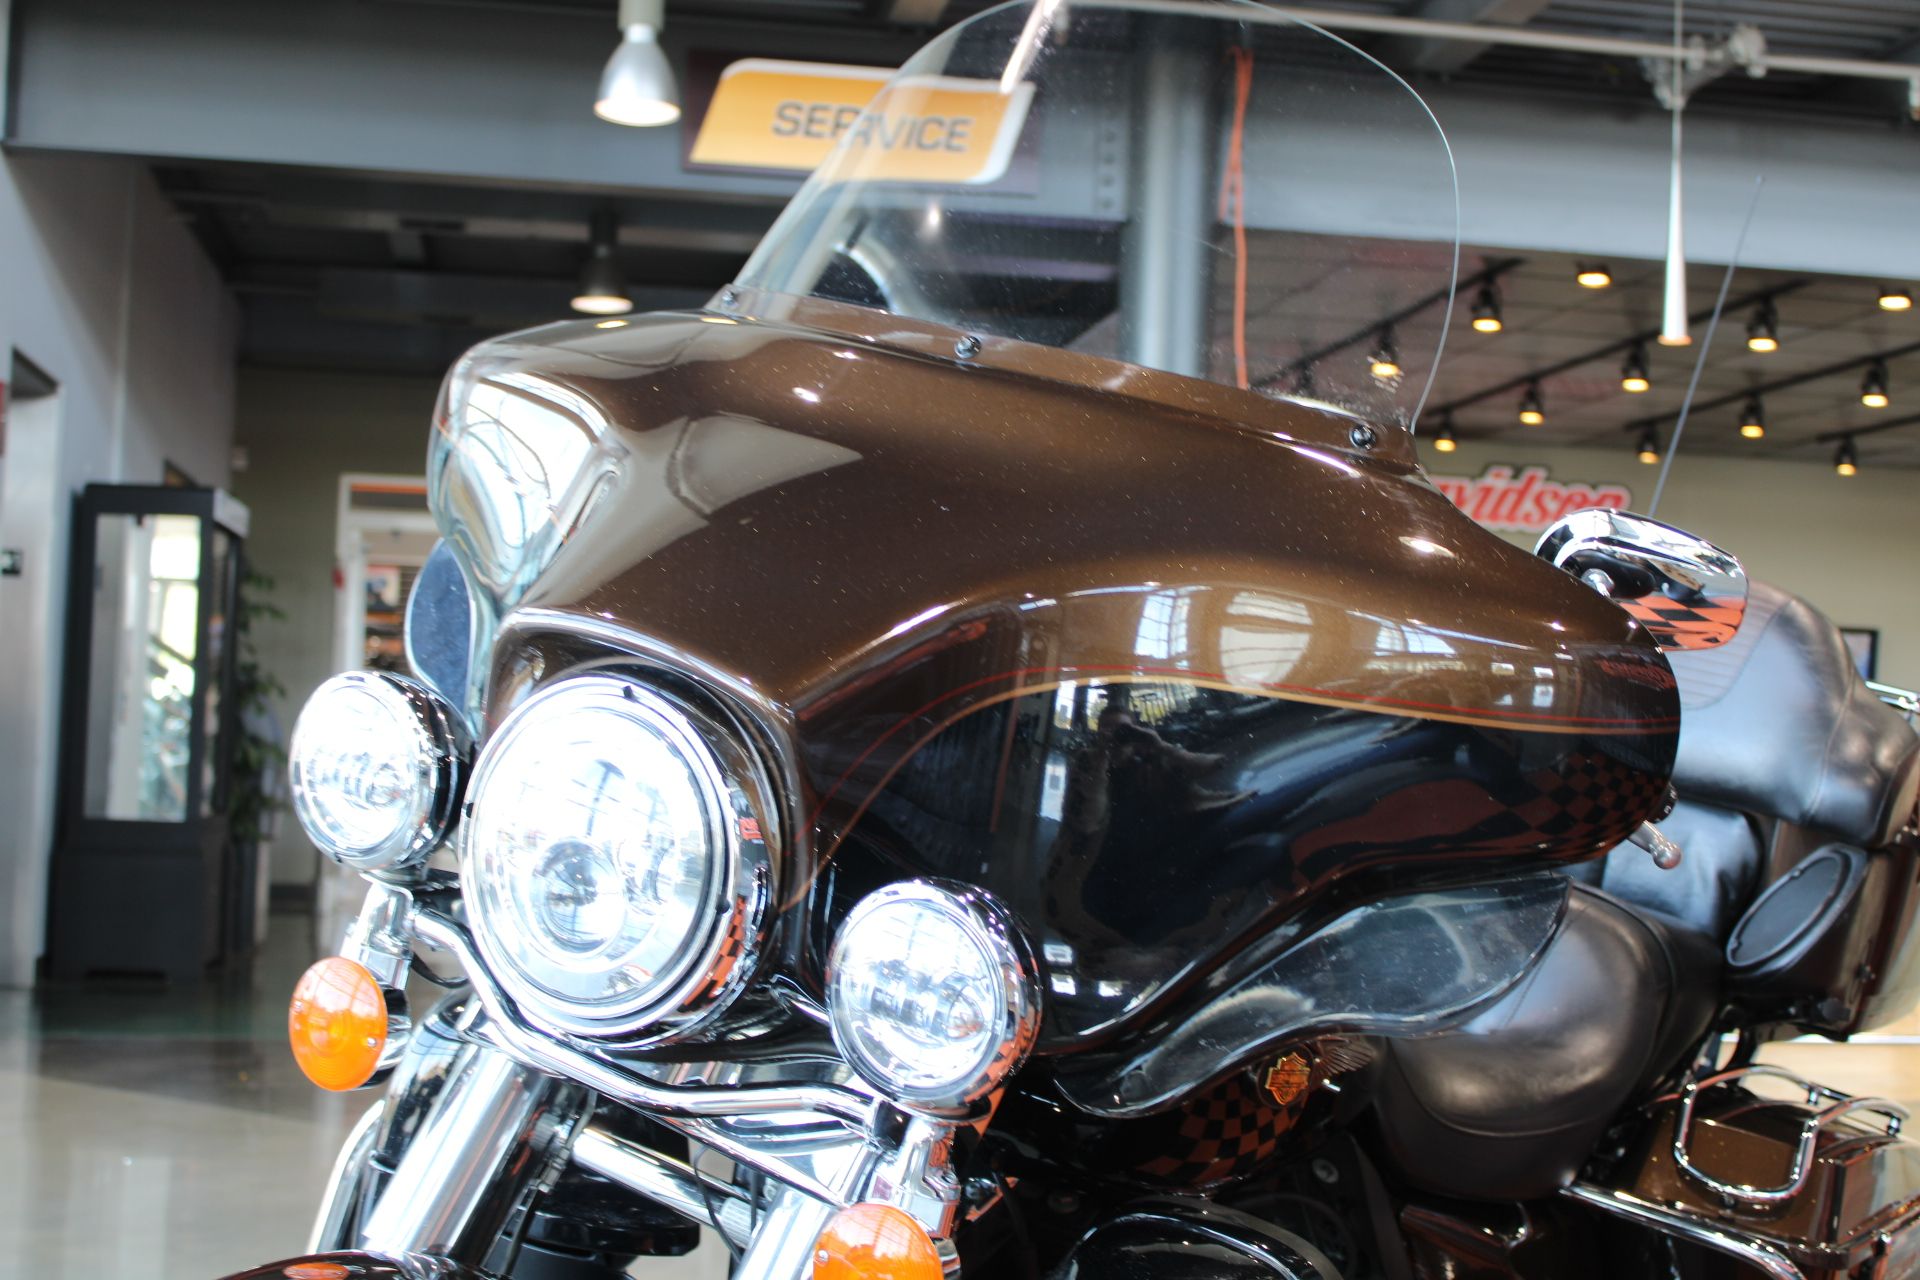 2013 Harley-Davidson Electra Glide® Ultra Limited 110th Anniversary Edition in Shorewood, Illinois - Photo 28